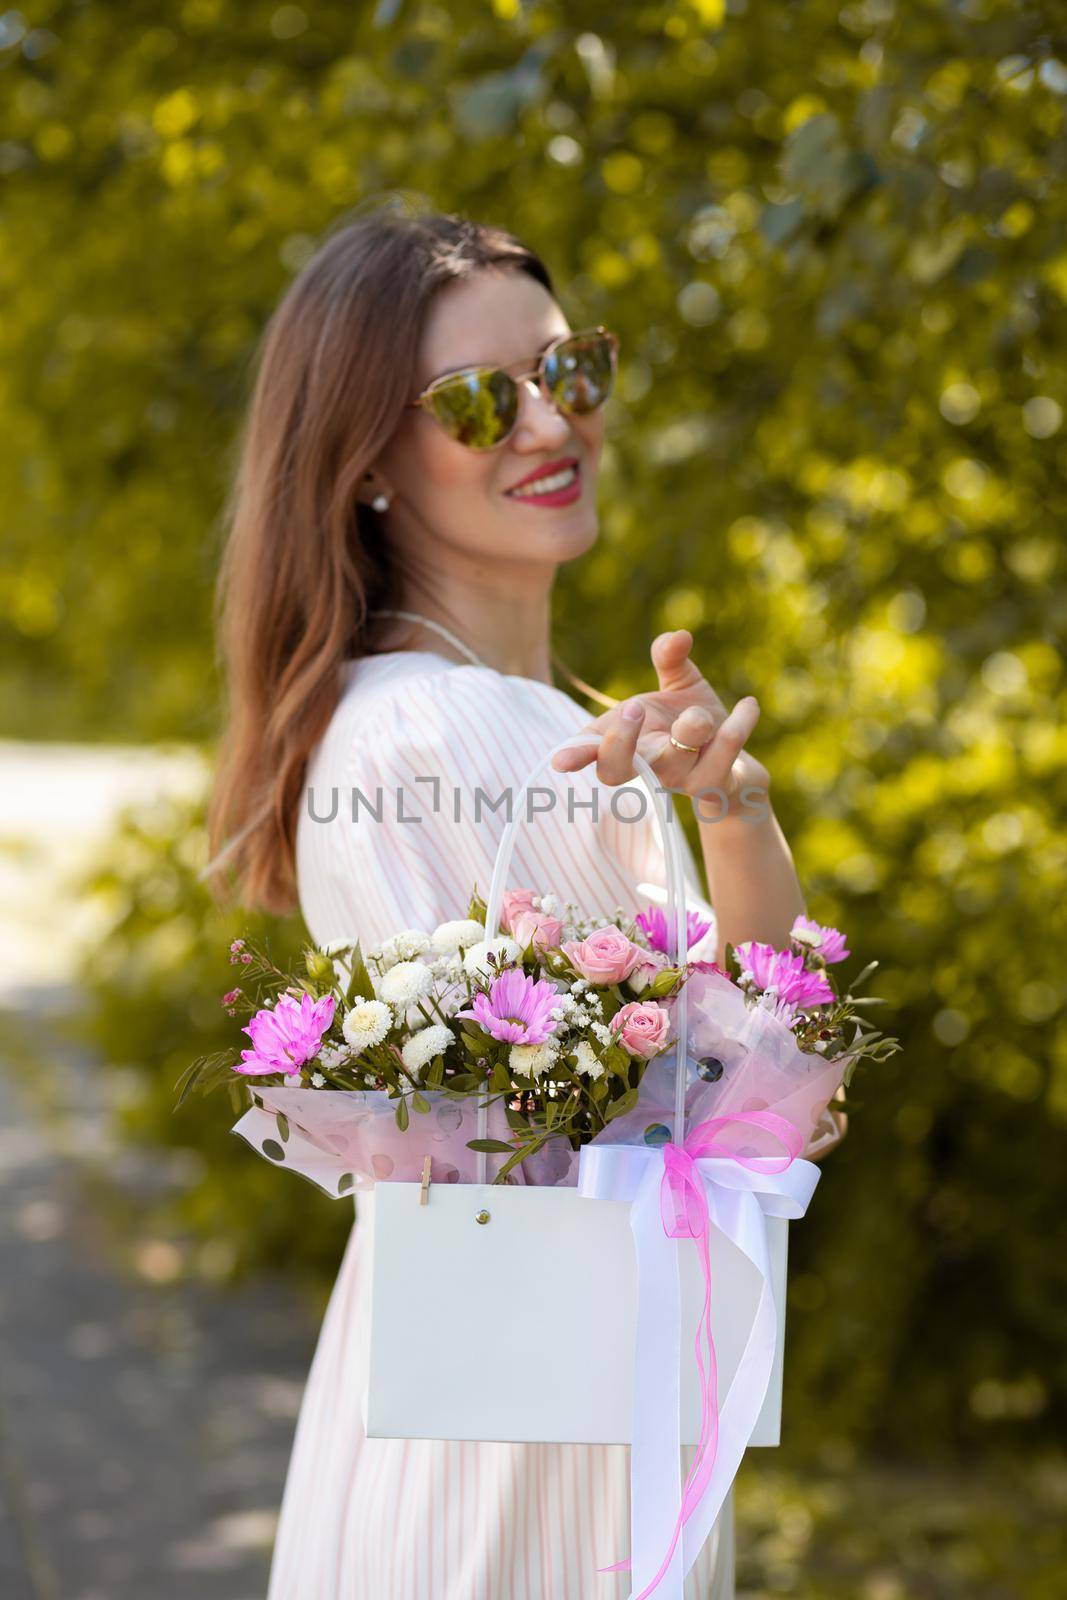 A beautiful bouquet of flowers in a box in the hands of a beautiful girl who walks along the street on a sunny day. Girl in a dress, glasses and sneakers. Focus on the background of flowers.